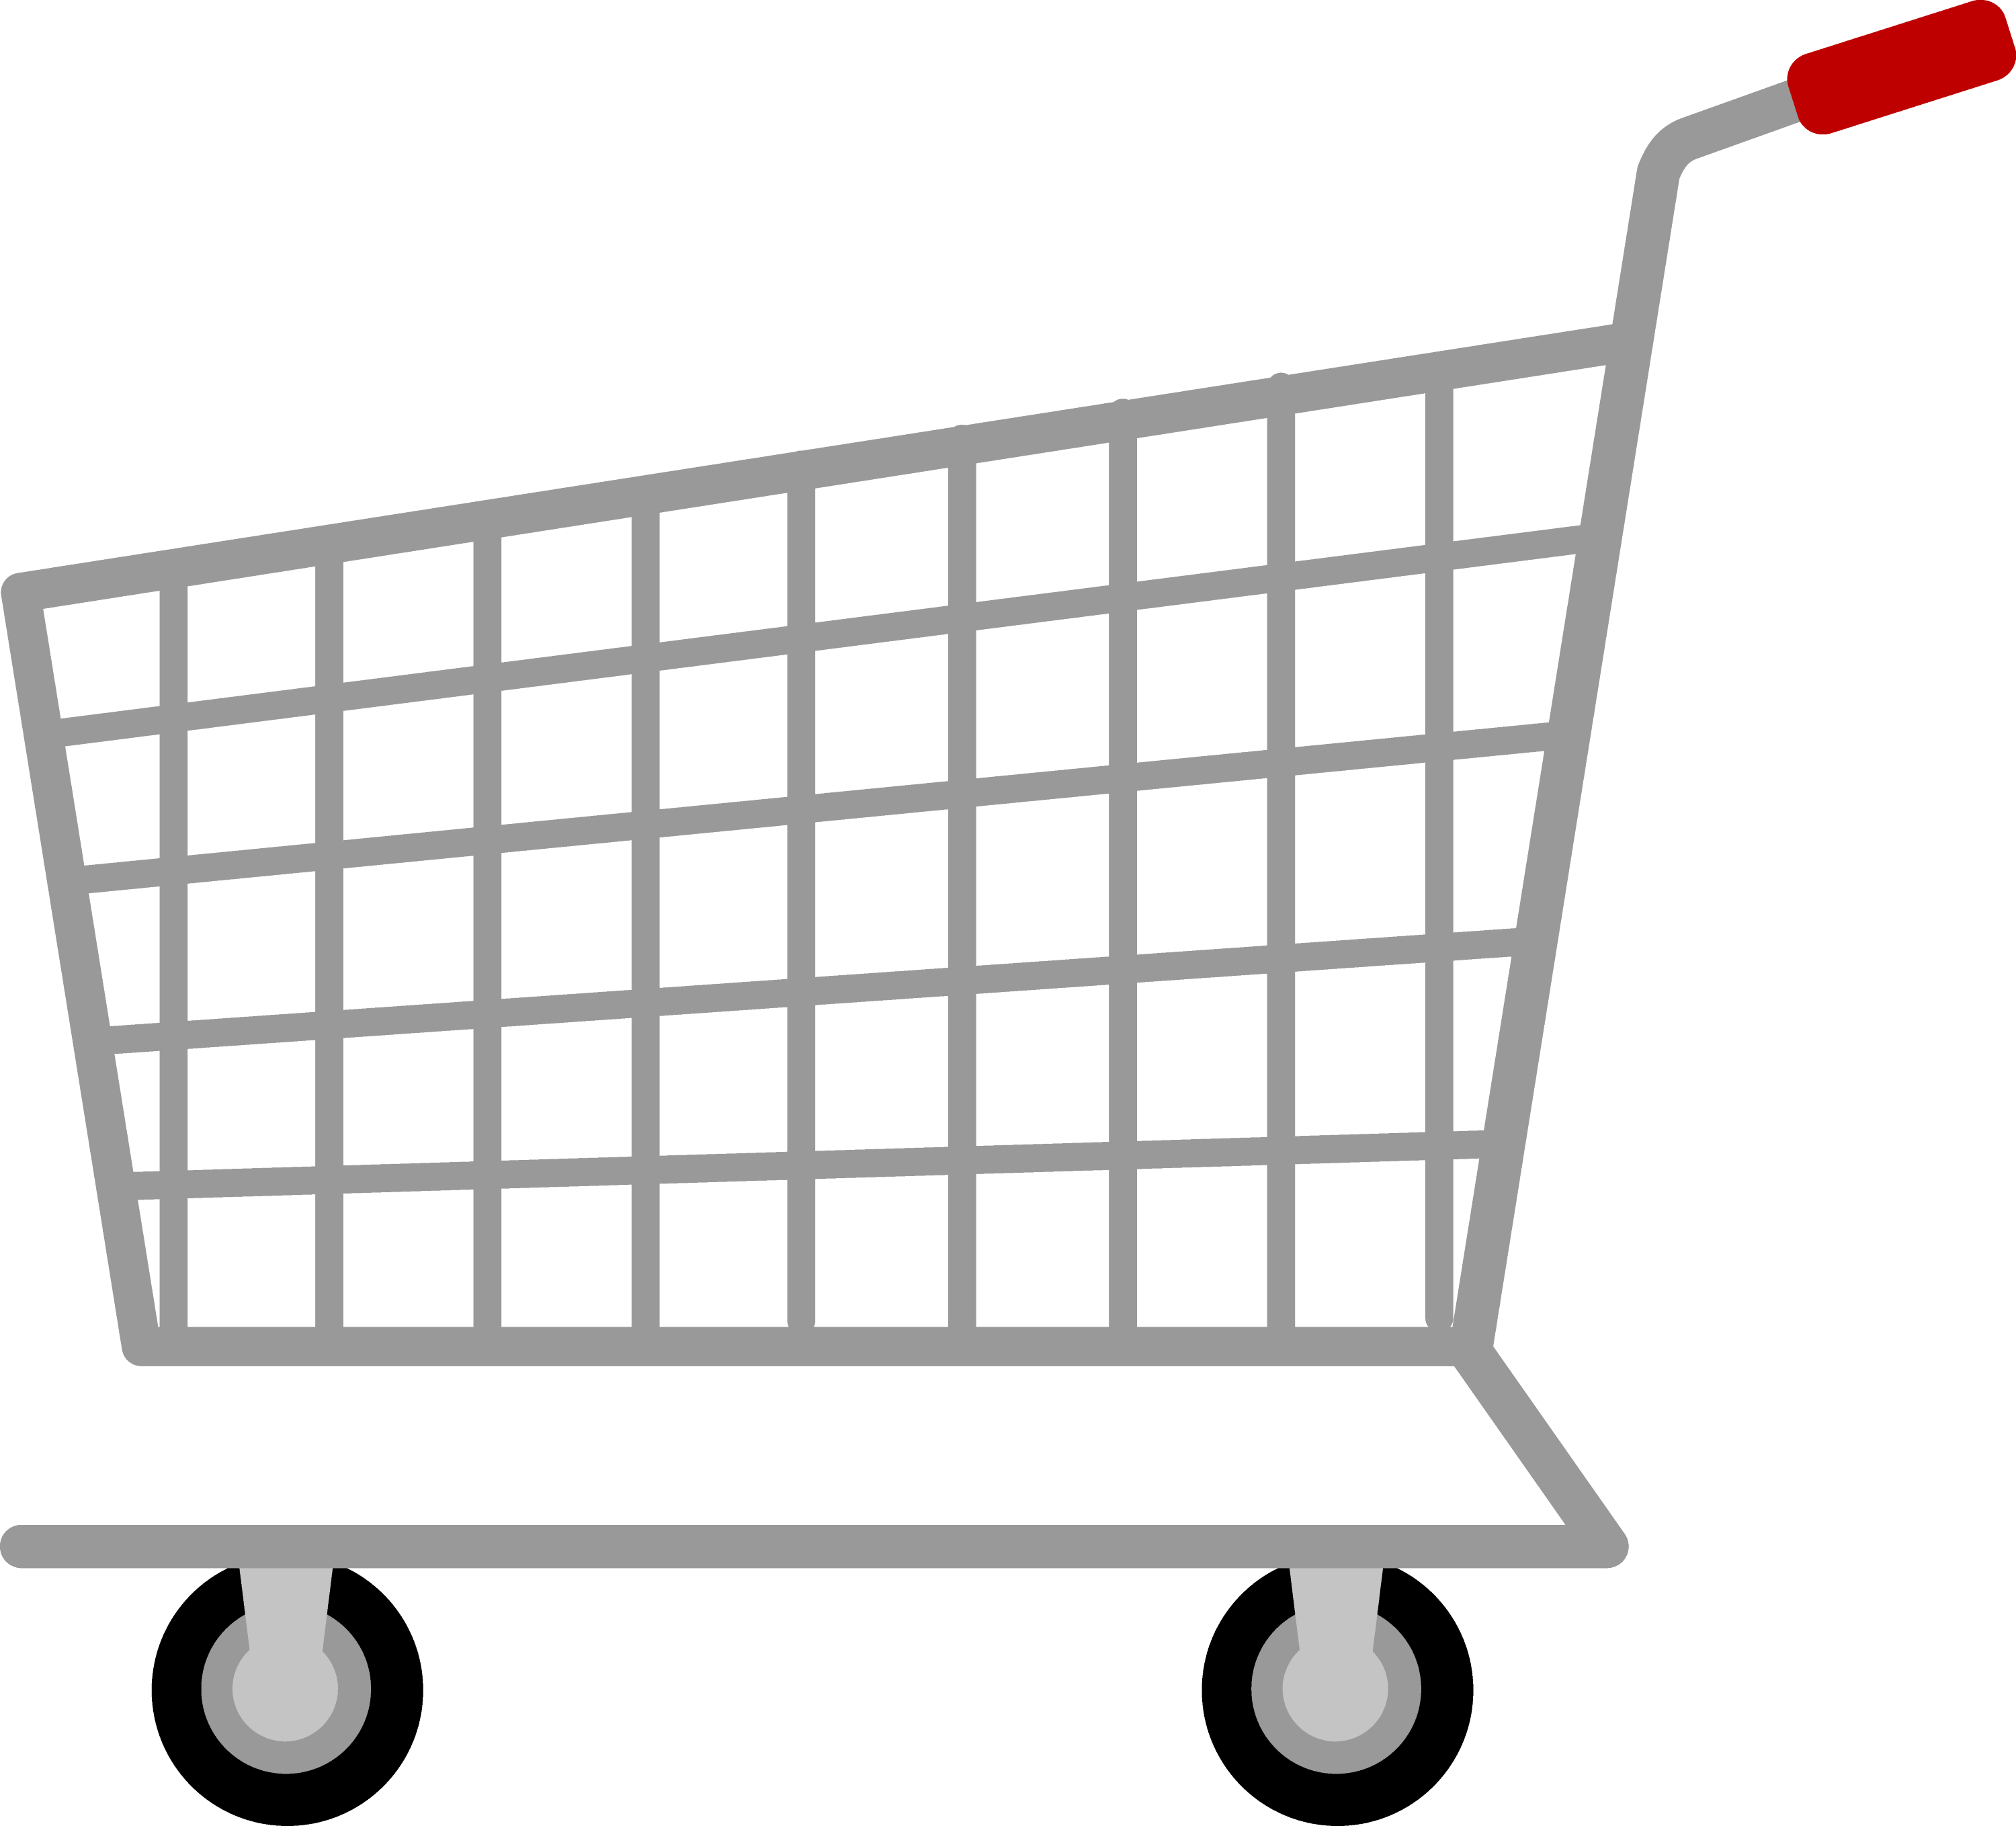 Cartoon Shopping Cart Cartoon Shopping Cart Royalty Free Vector Image